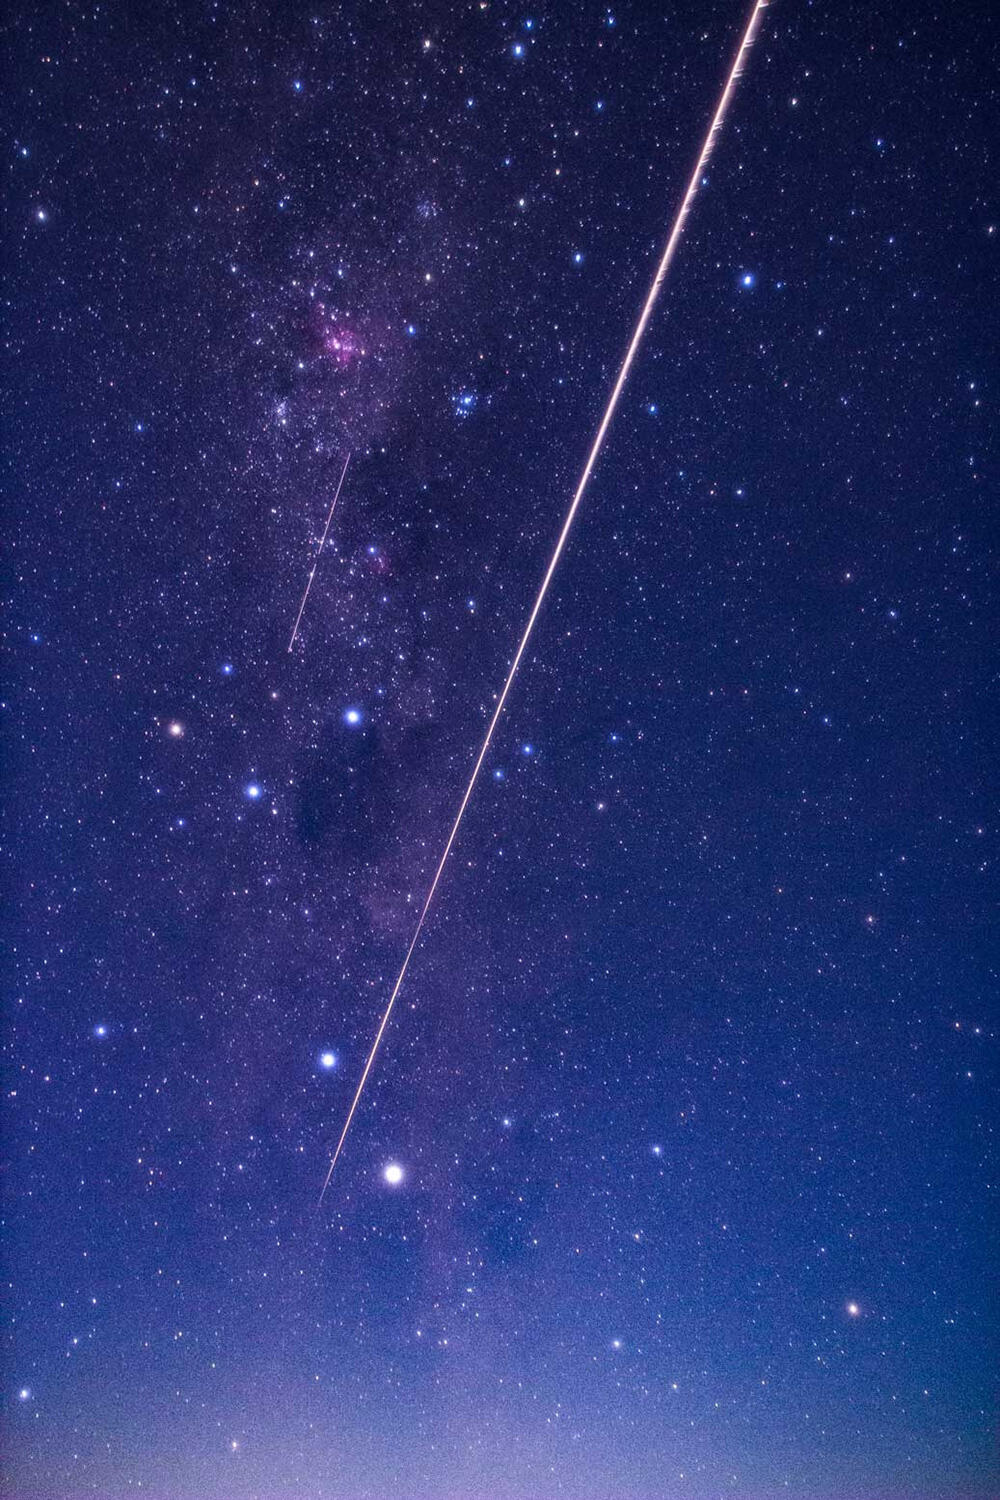 The re-entry capsule of Hayabusa2 passing over Coober Pedy, Australia, as a fireball.